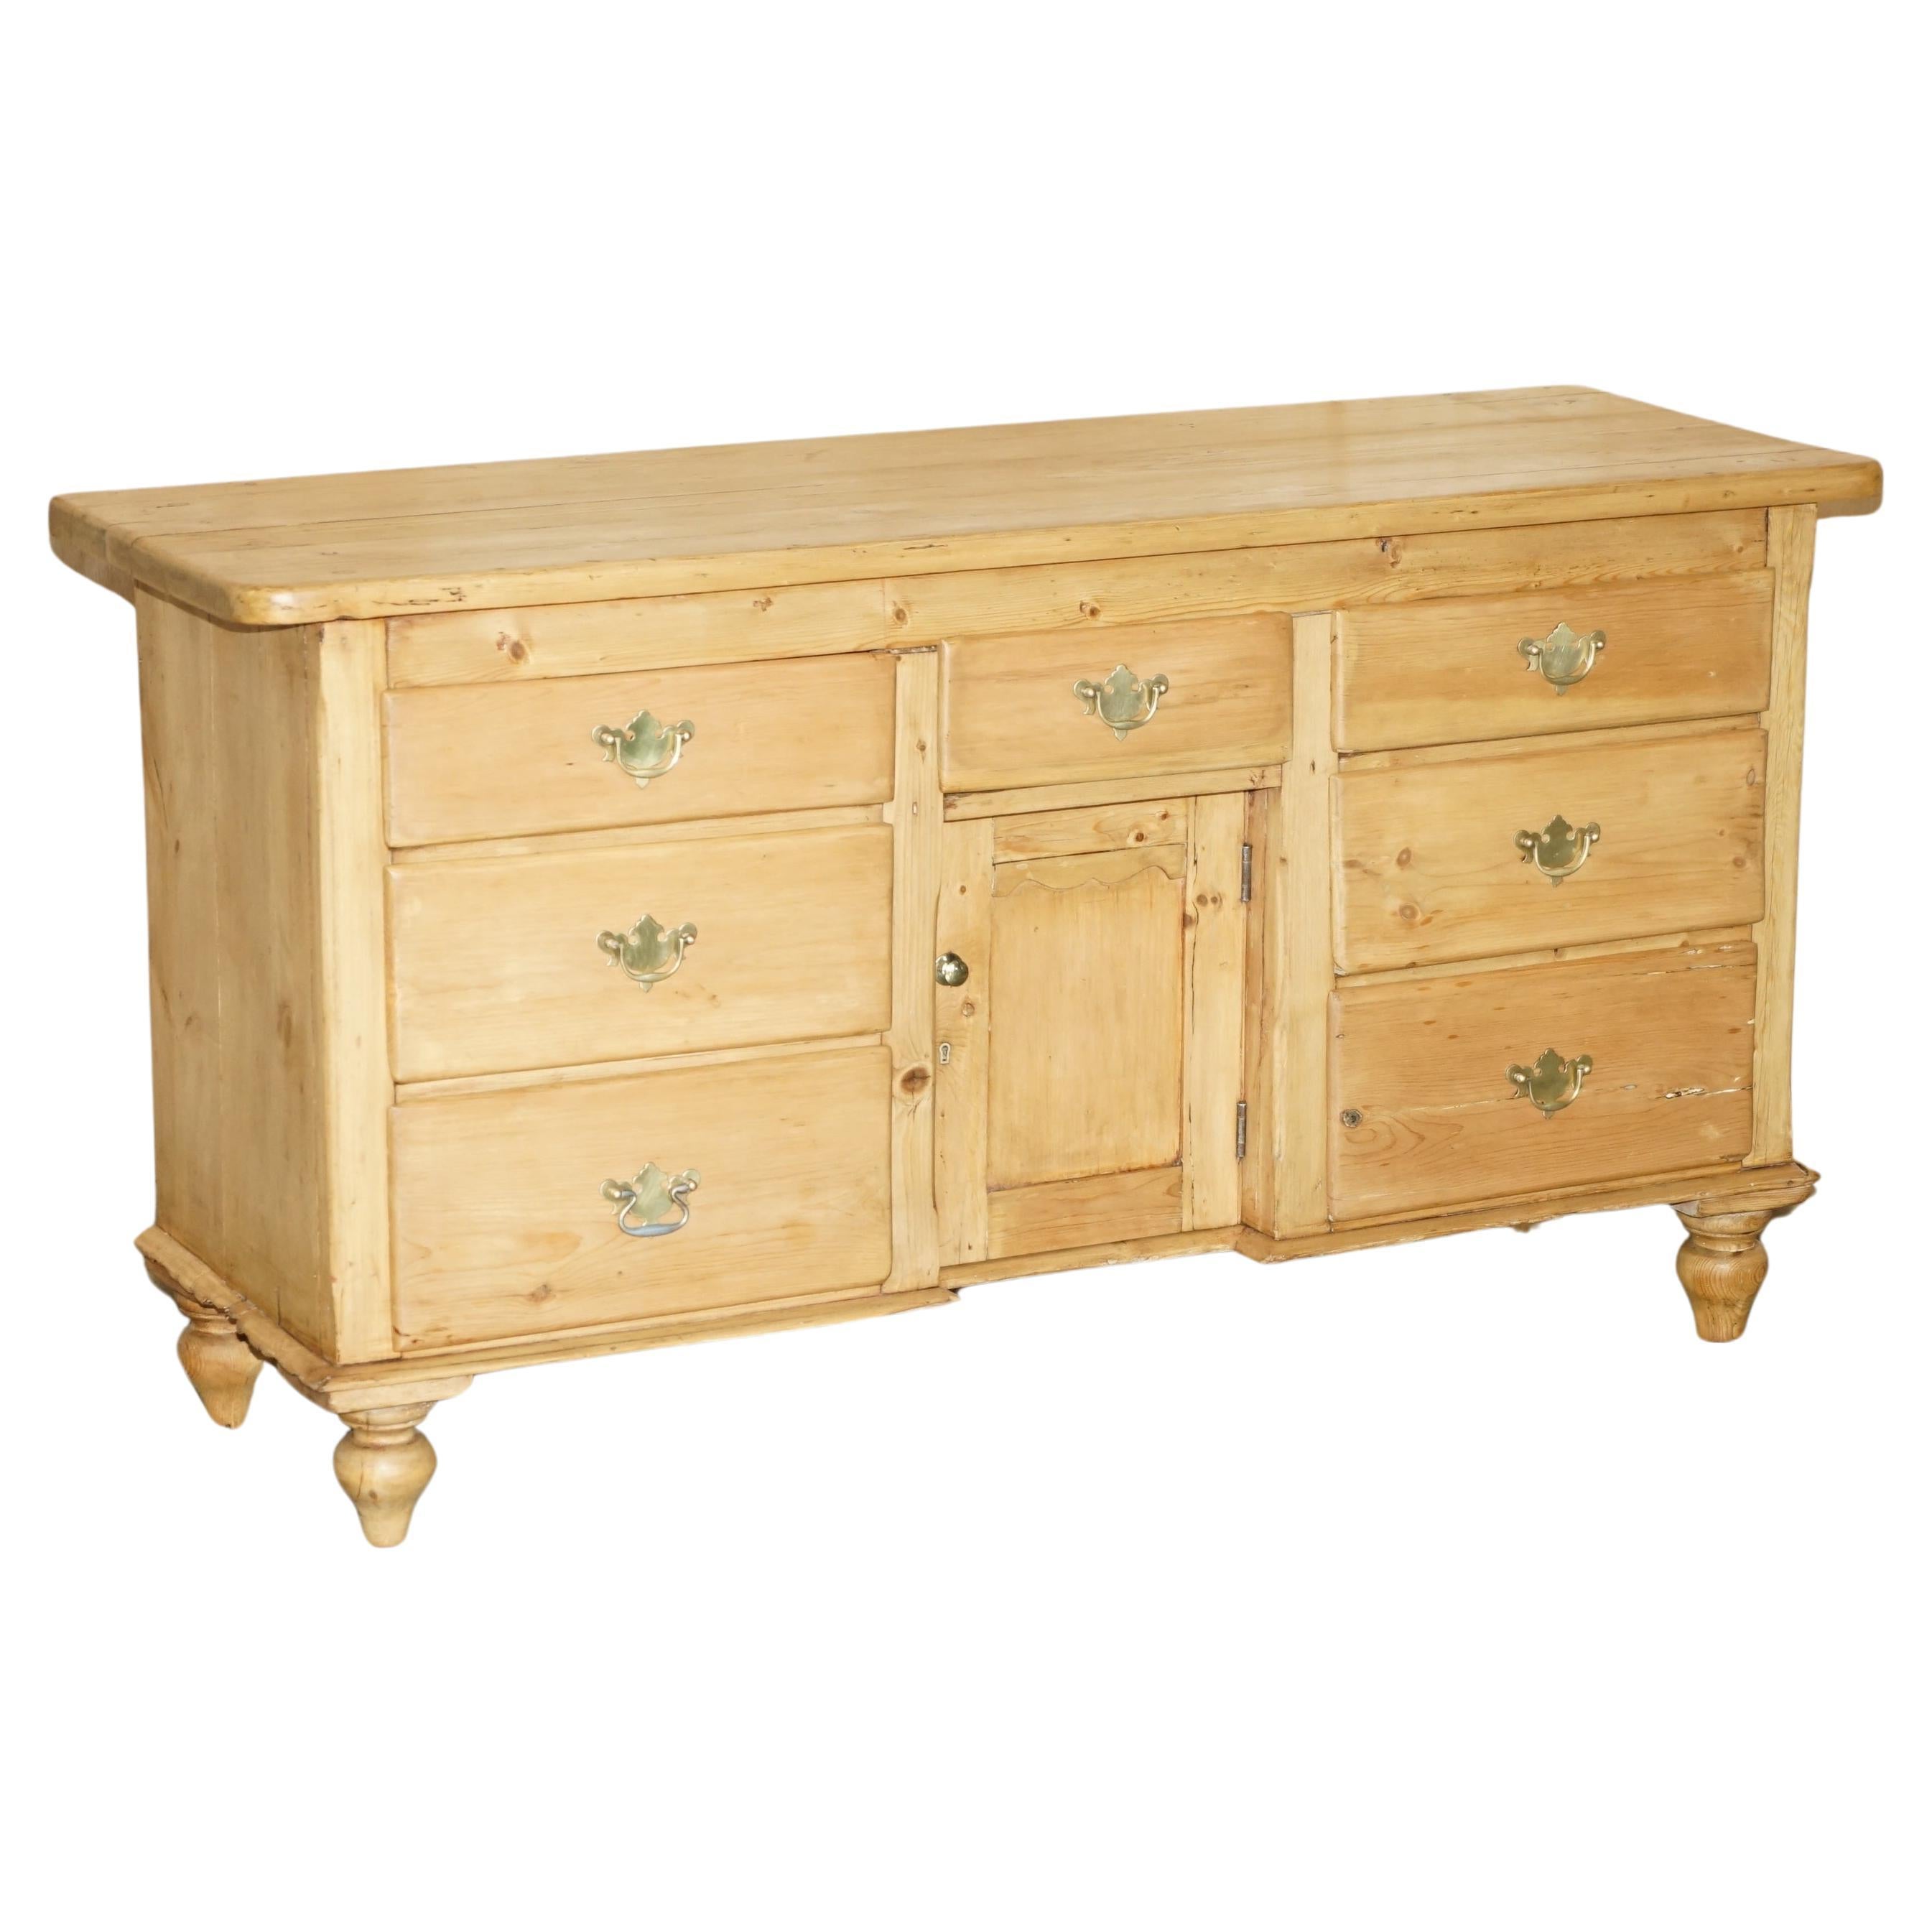 STUNNING FULLY RESTORED ANTIQUE CIRCA 1860 STRiPPED PINE HOUSEKEEPERS SIDEBOARD For Sale